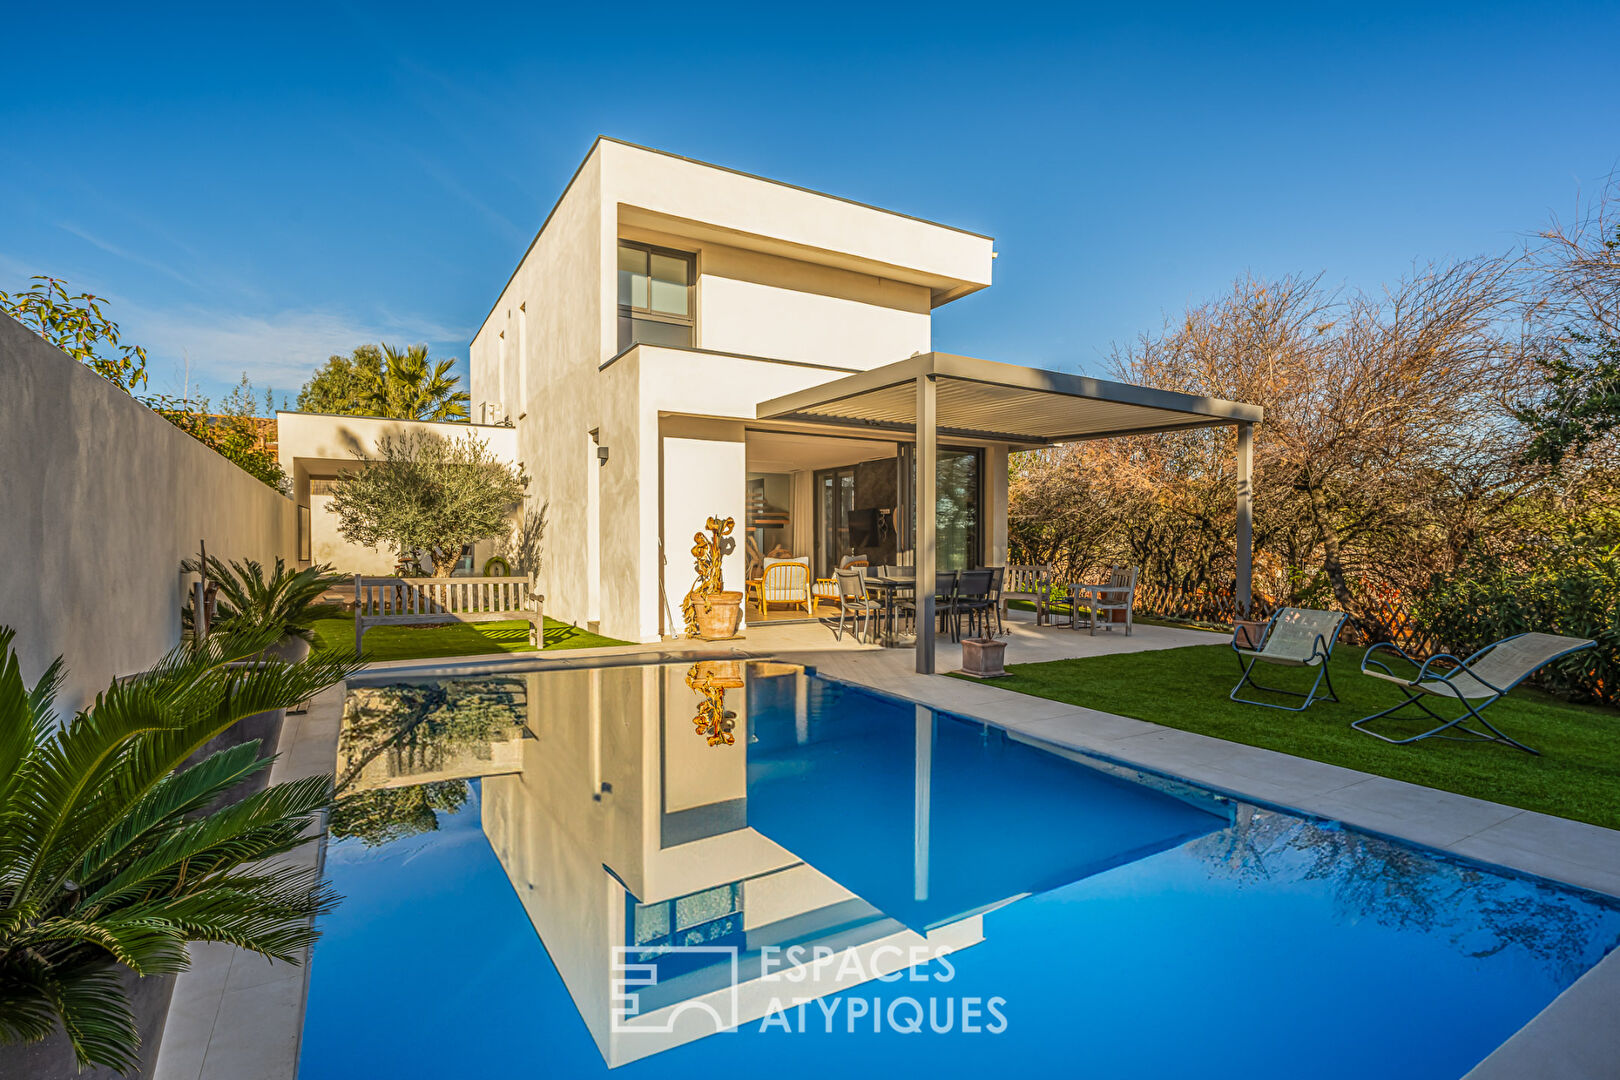 Superb contemporary with swimming pool